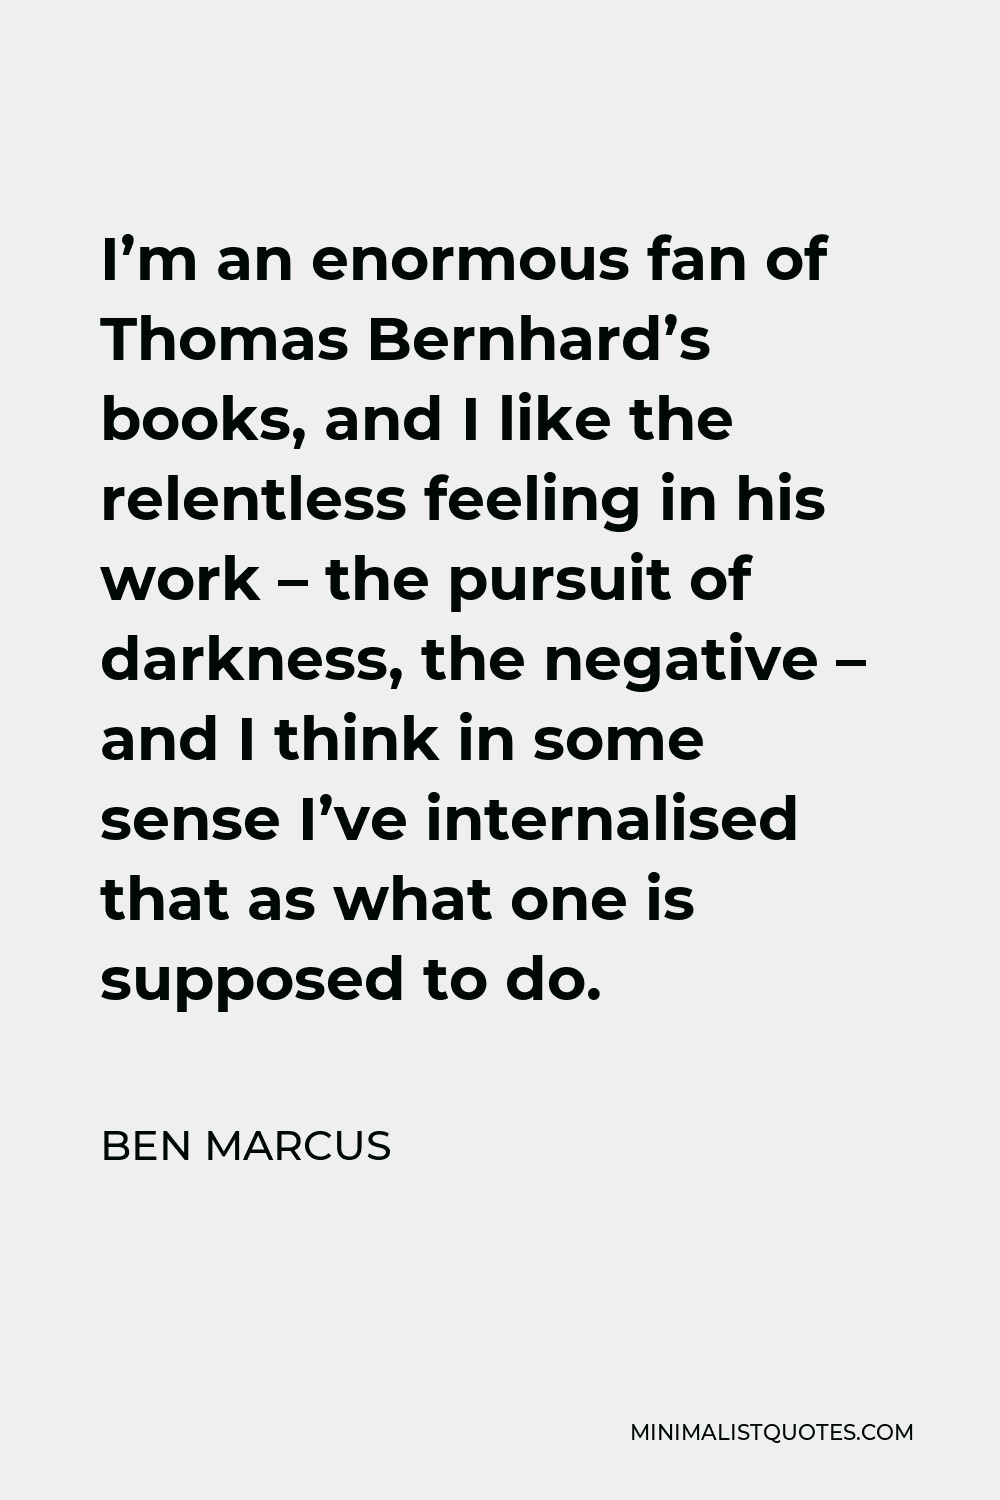 Ben Marcus Quote - I’m an enormous fan of Thomas Bernhard’s books, and I like the relentless feeling in his work – the pursuit of darkness, the negative – and I think in some sense I’ve internalised that as what one is supposed to do.